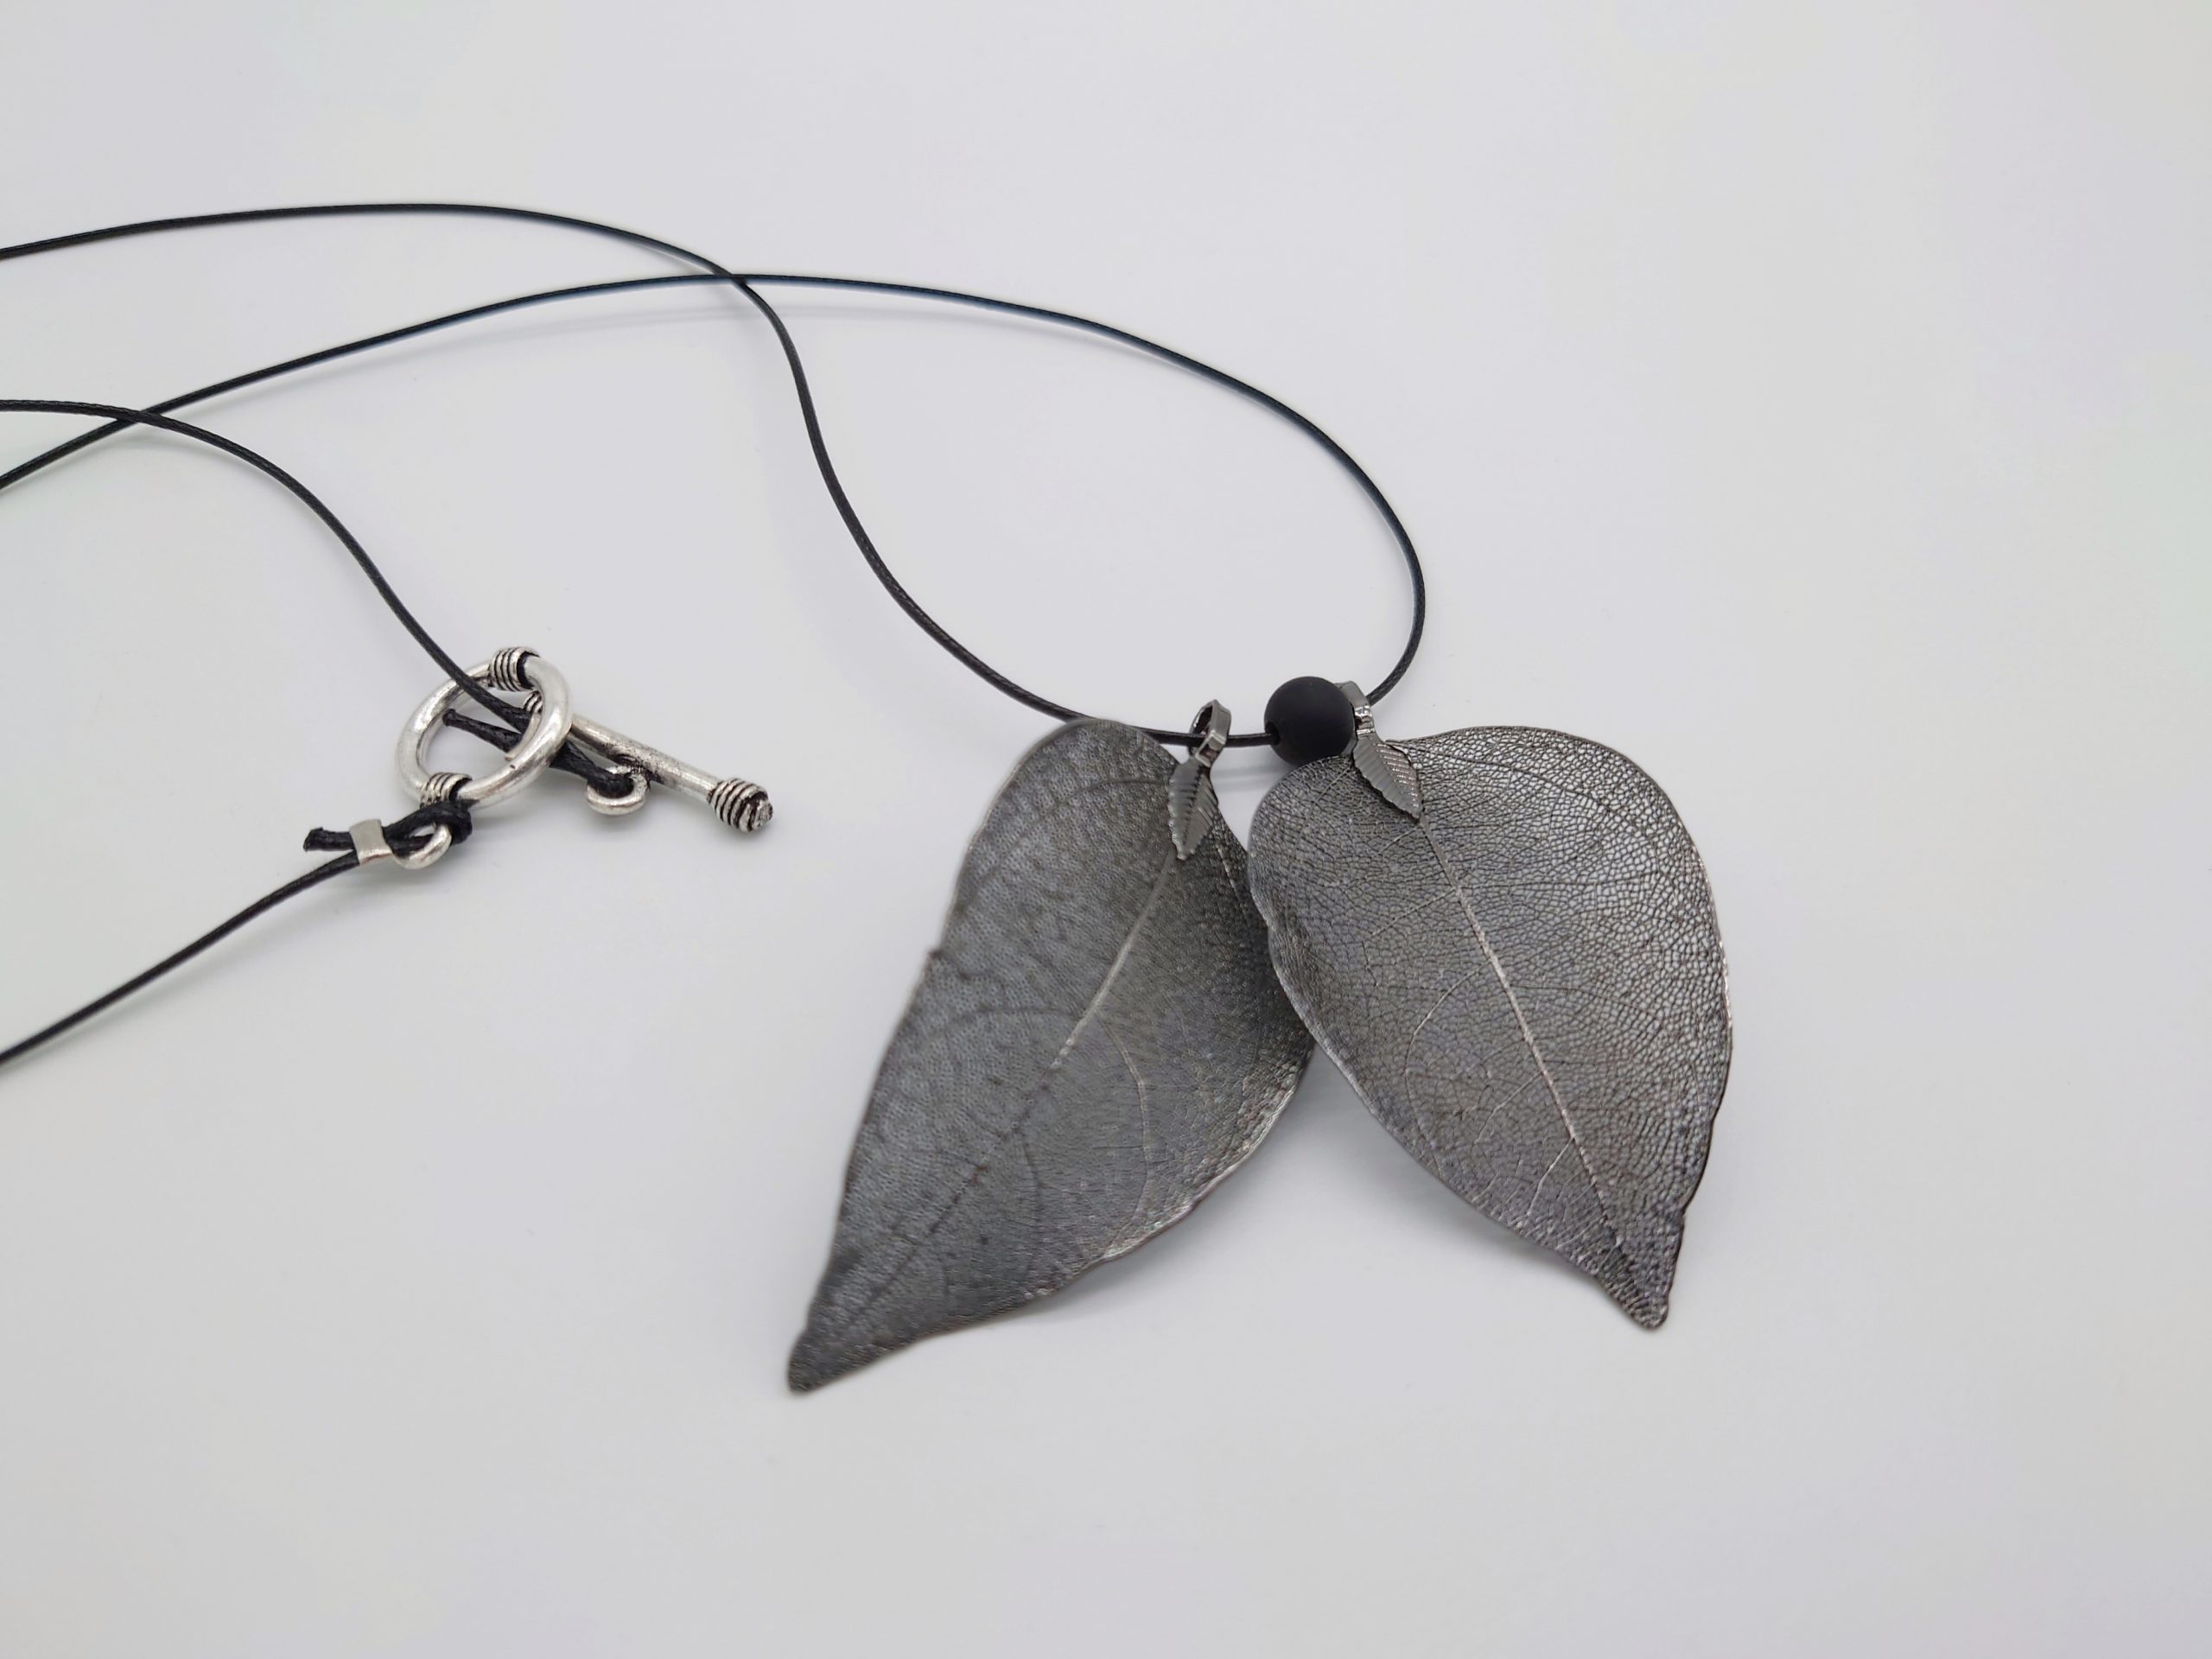 Filigree fairy leaves necklace